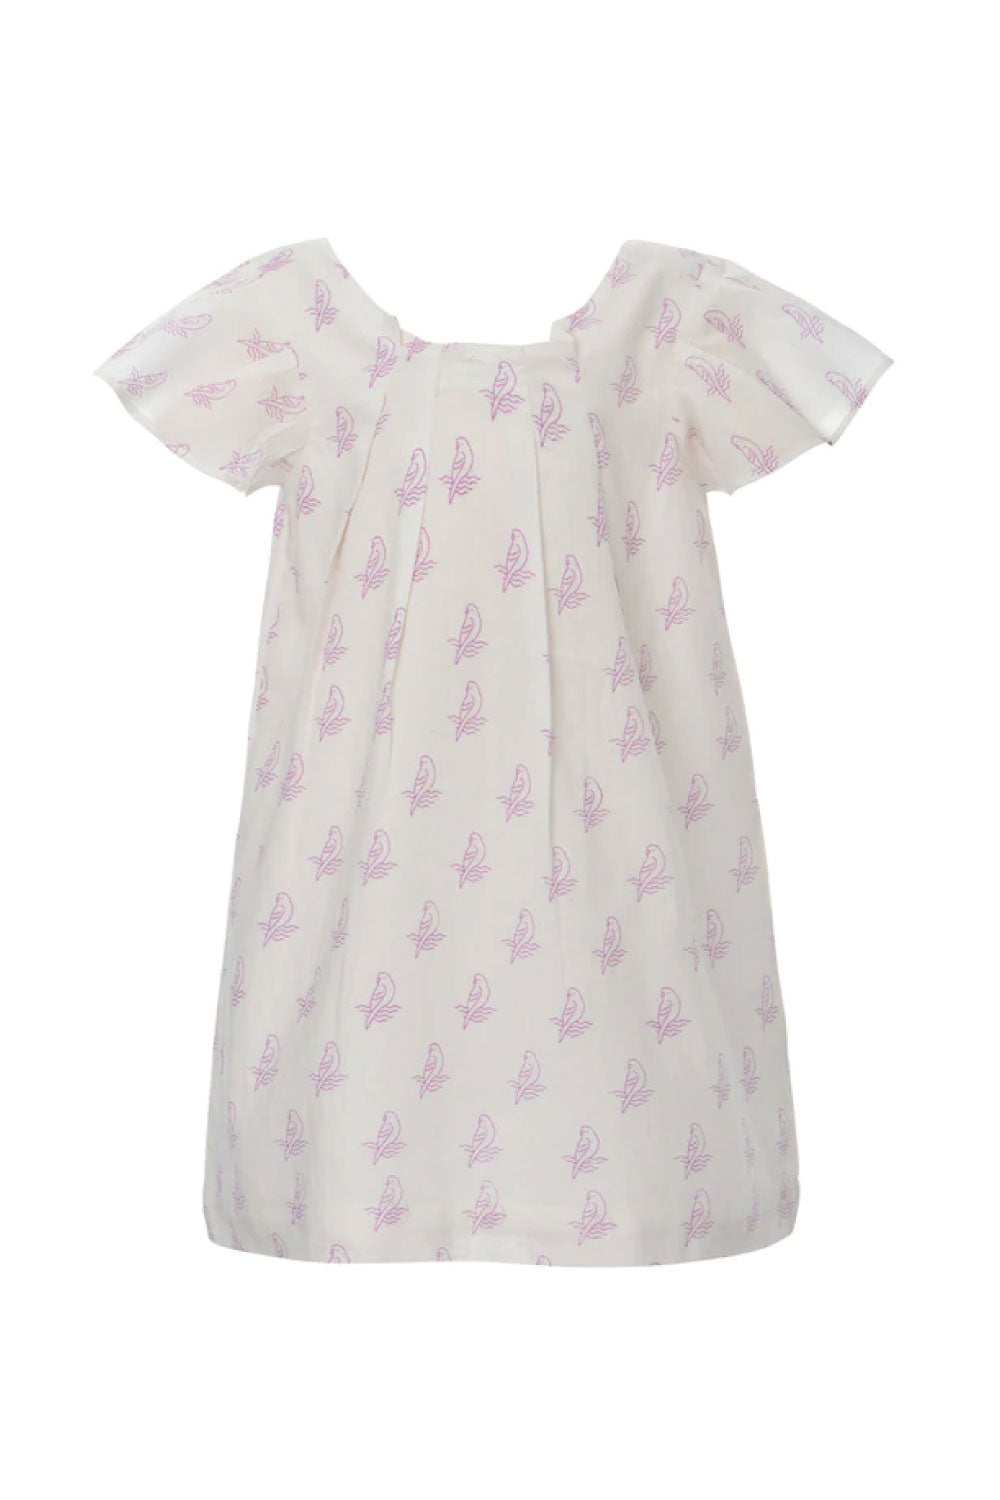 Image of the front of the Alice Parrot Dress in Lilac.